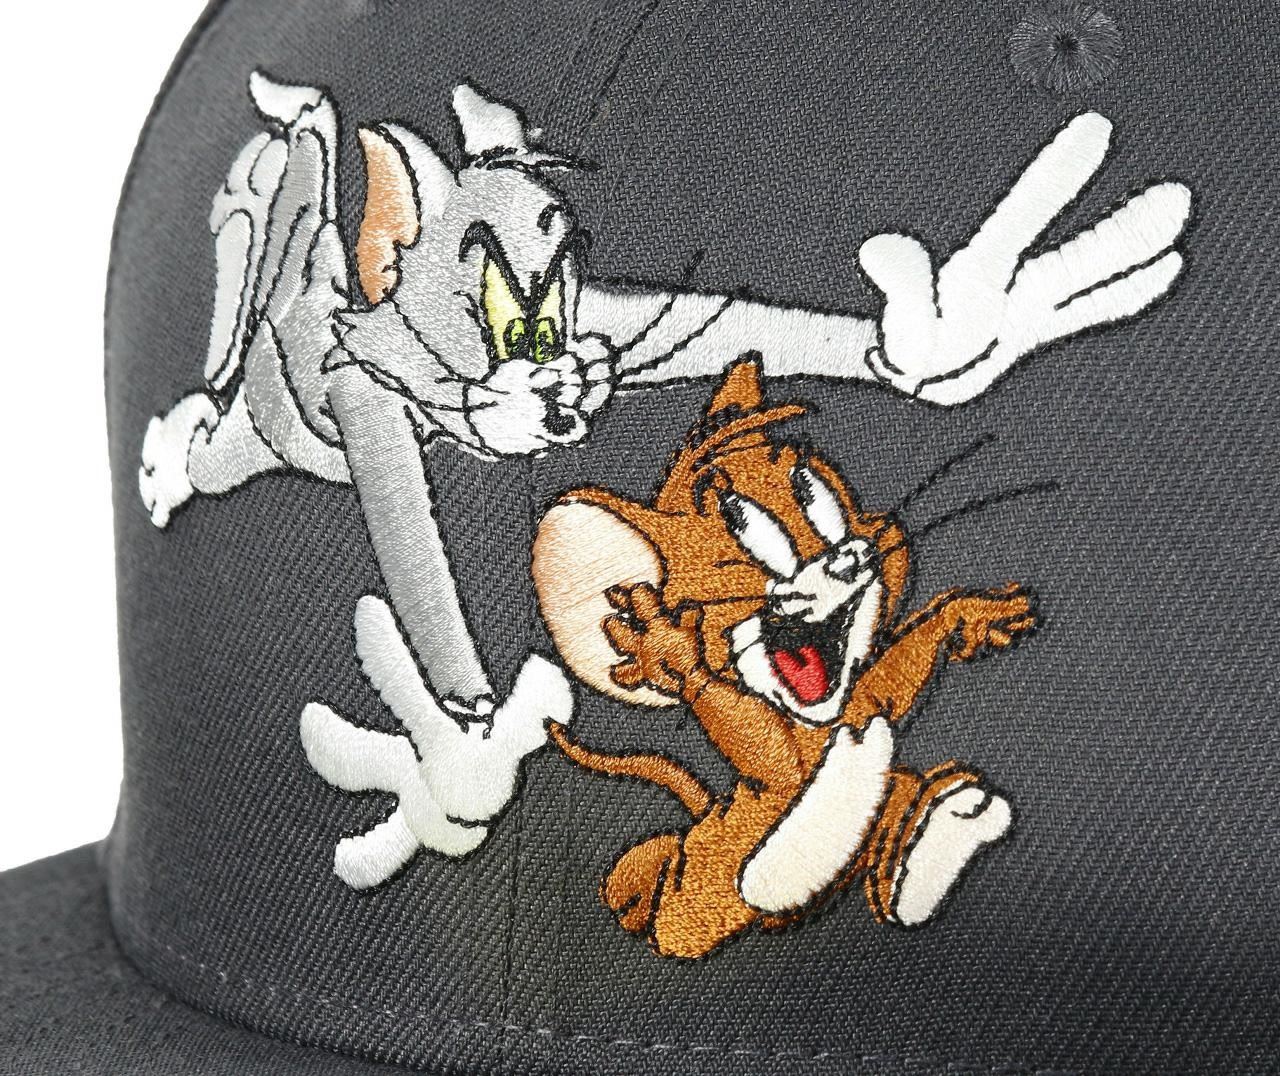 Tom and Jerry Chase Tom and Jerry Edition 59Fifty Basecap New Era